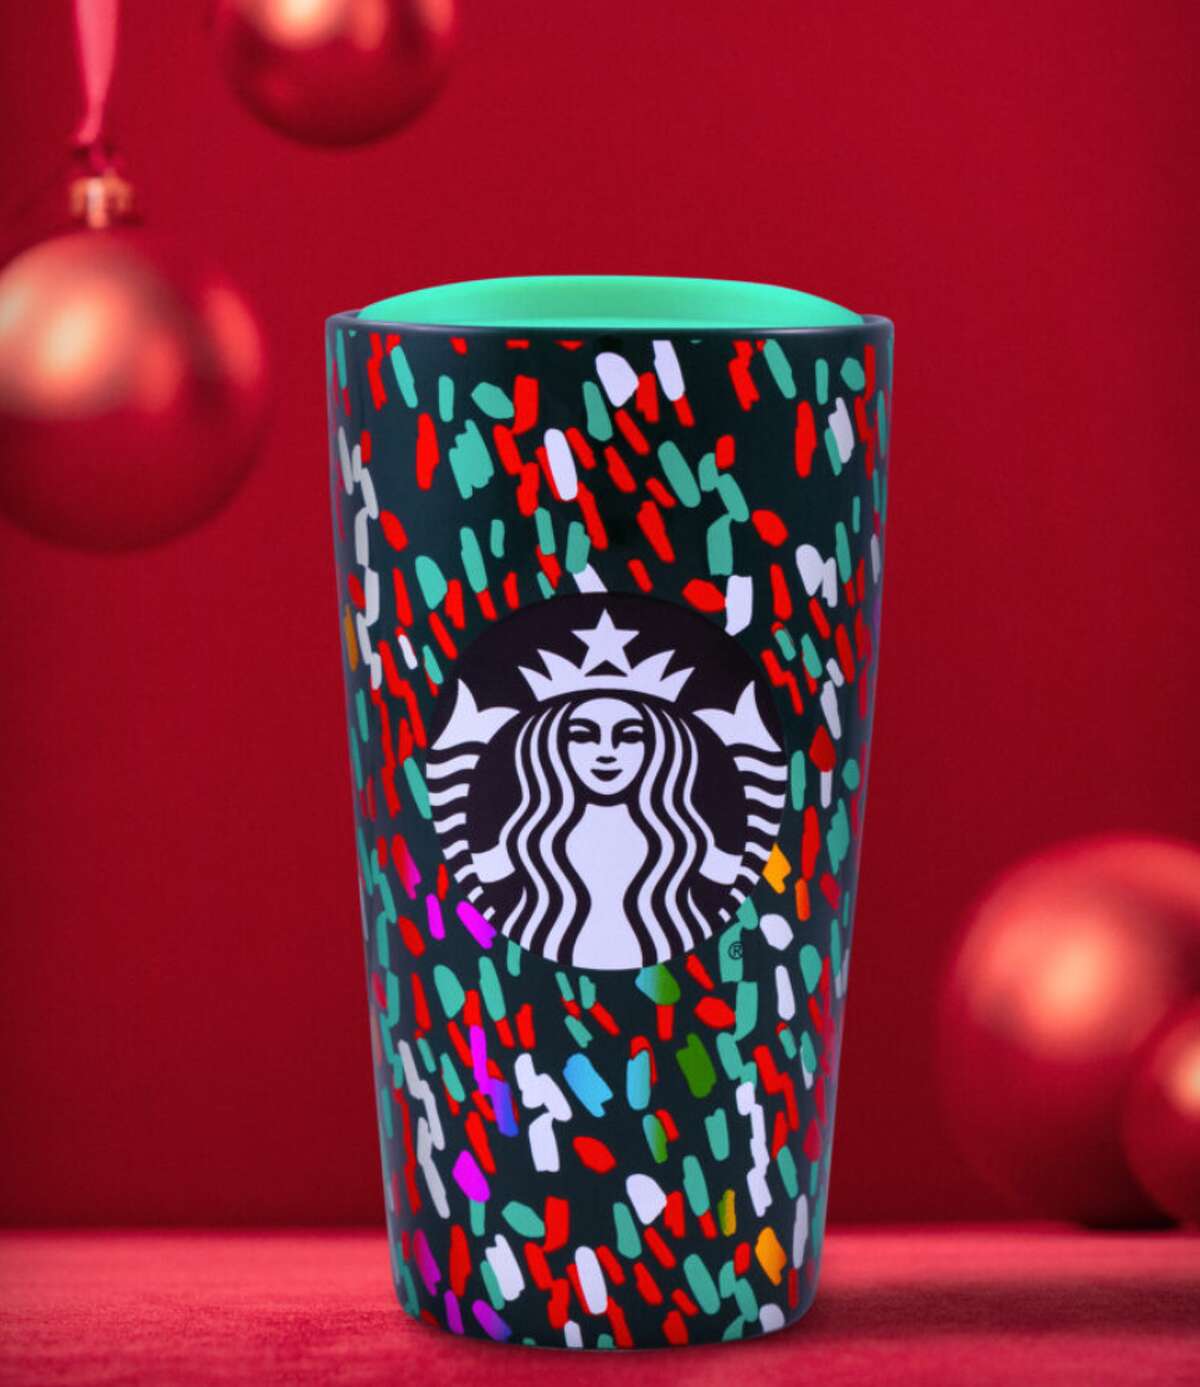 Starbucks releases new festive designs for their holiday cups